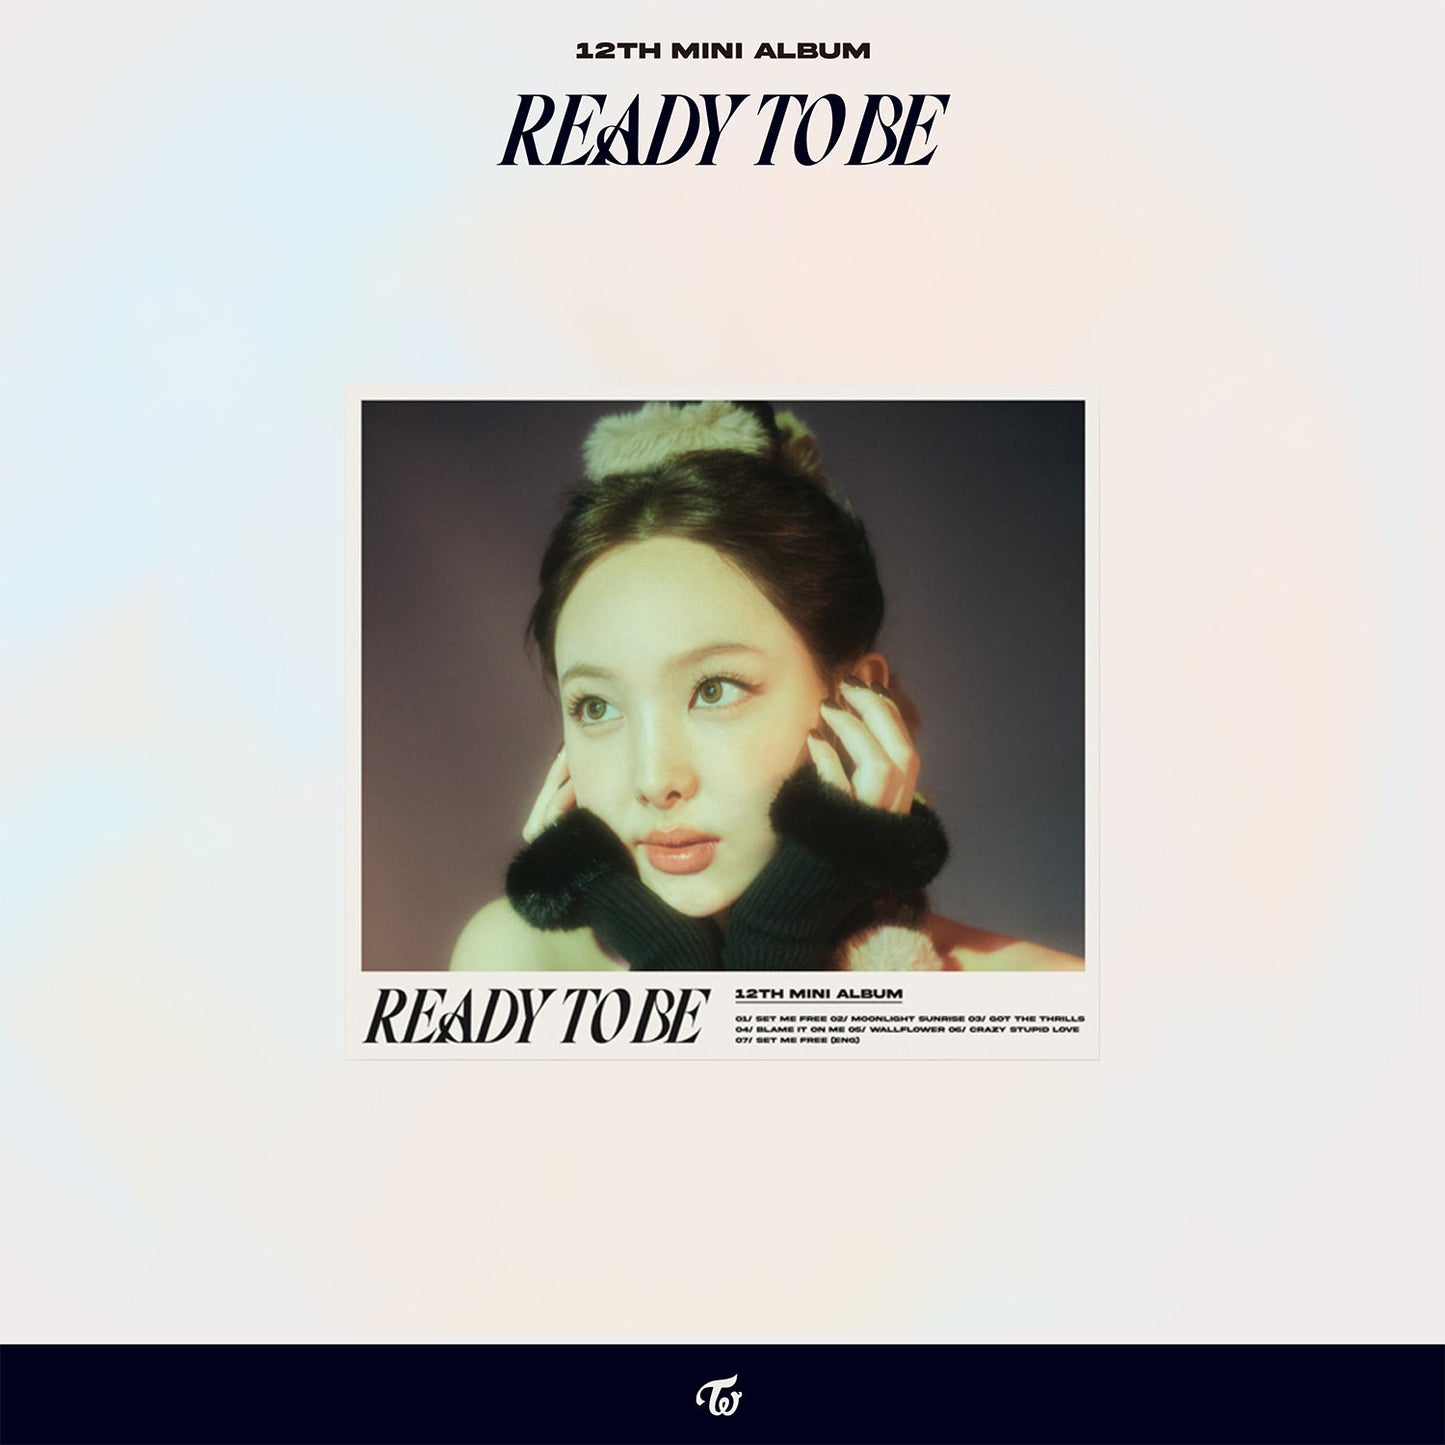 TWICE 12TH MINI ALBUM 'READY TO BE' (DIGIPACK) NAYEON VERSION COVER